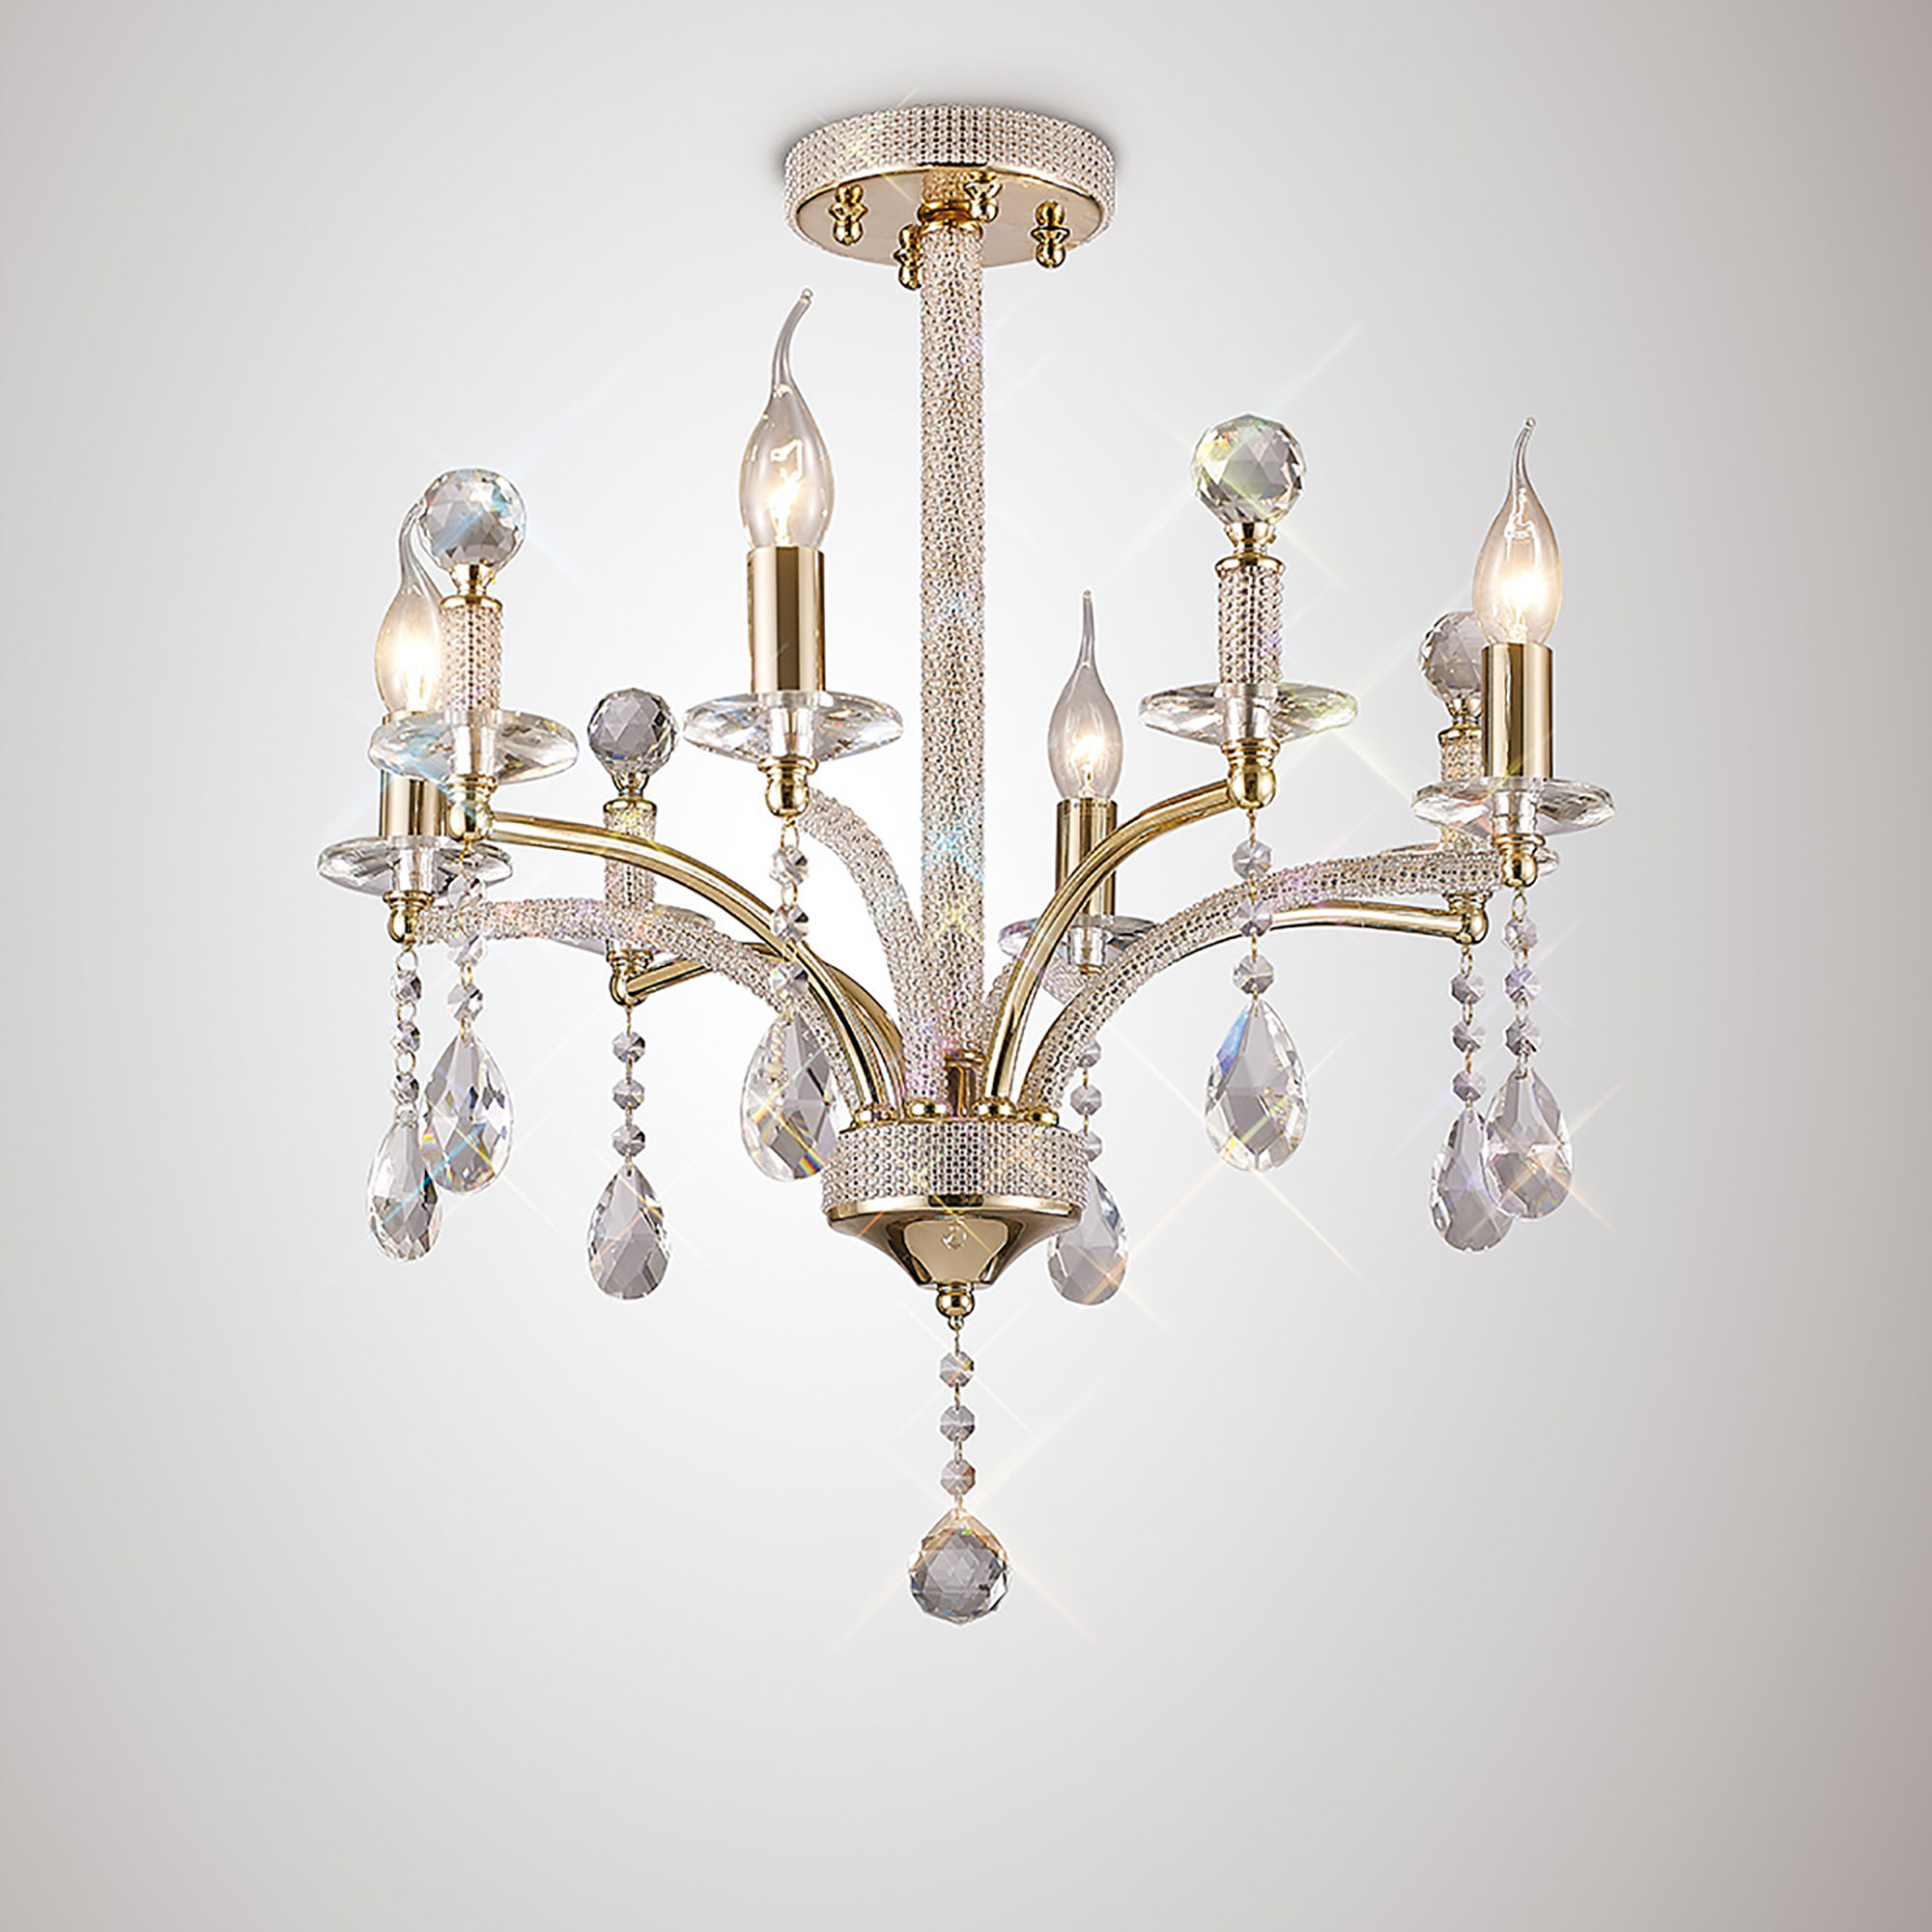 IL32364  Fiore Crystal Pendant 4 Light French Gold